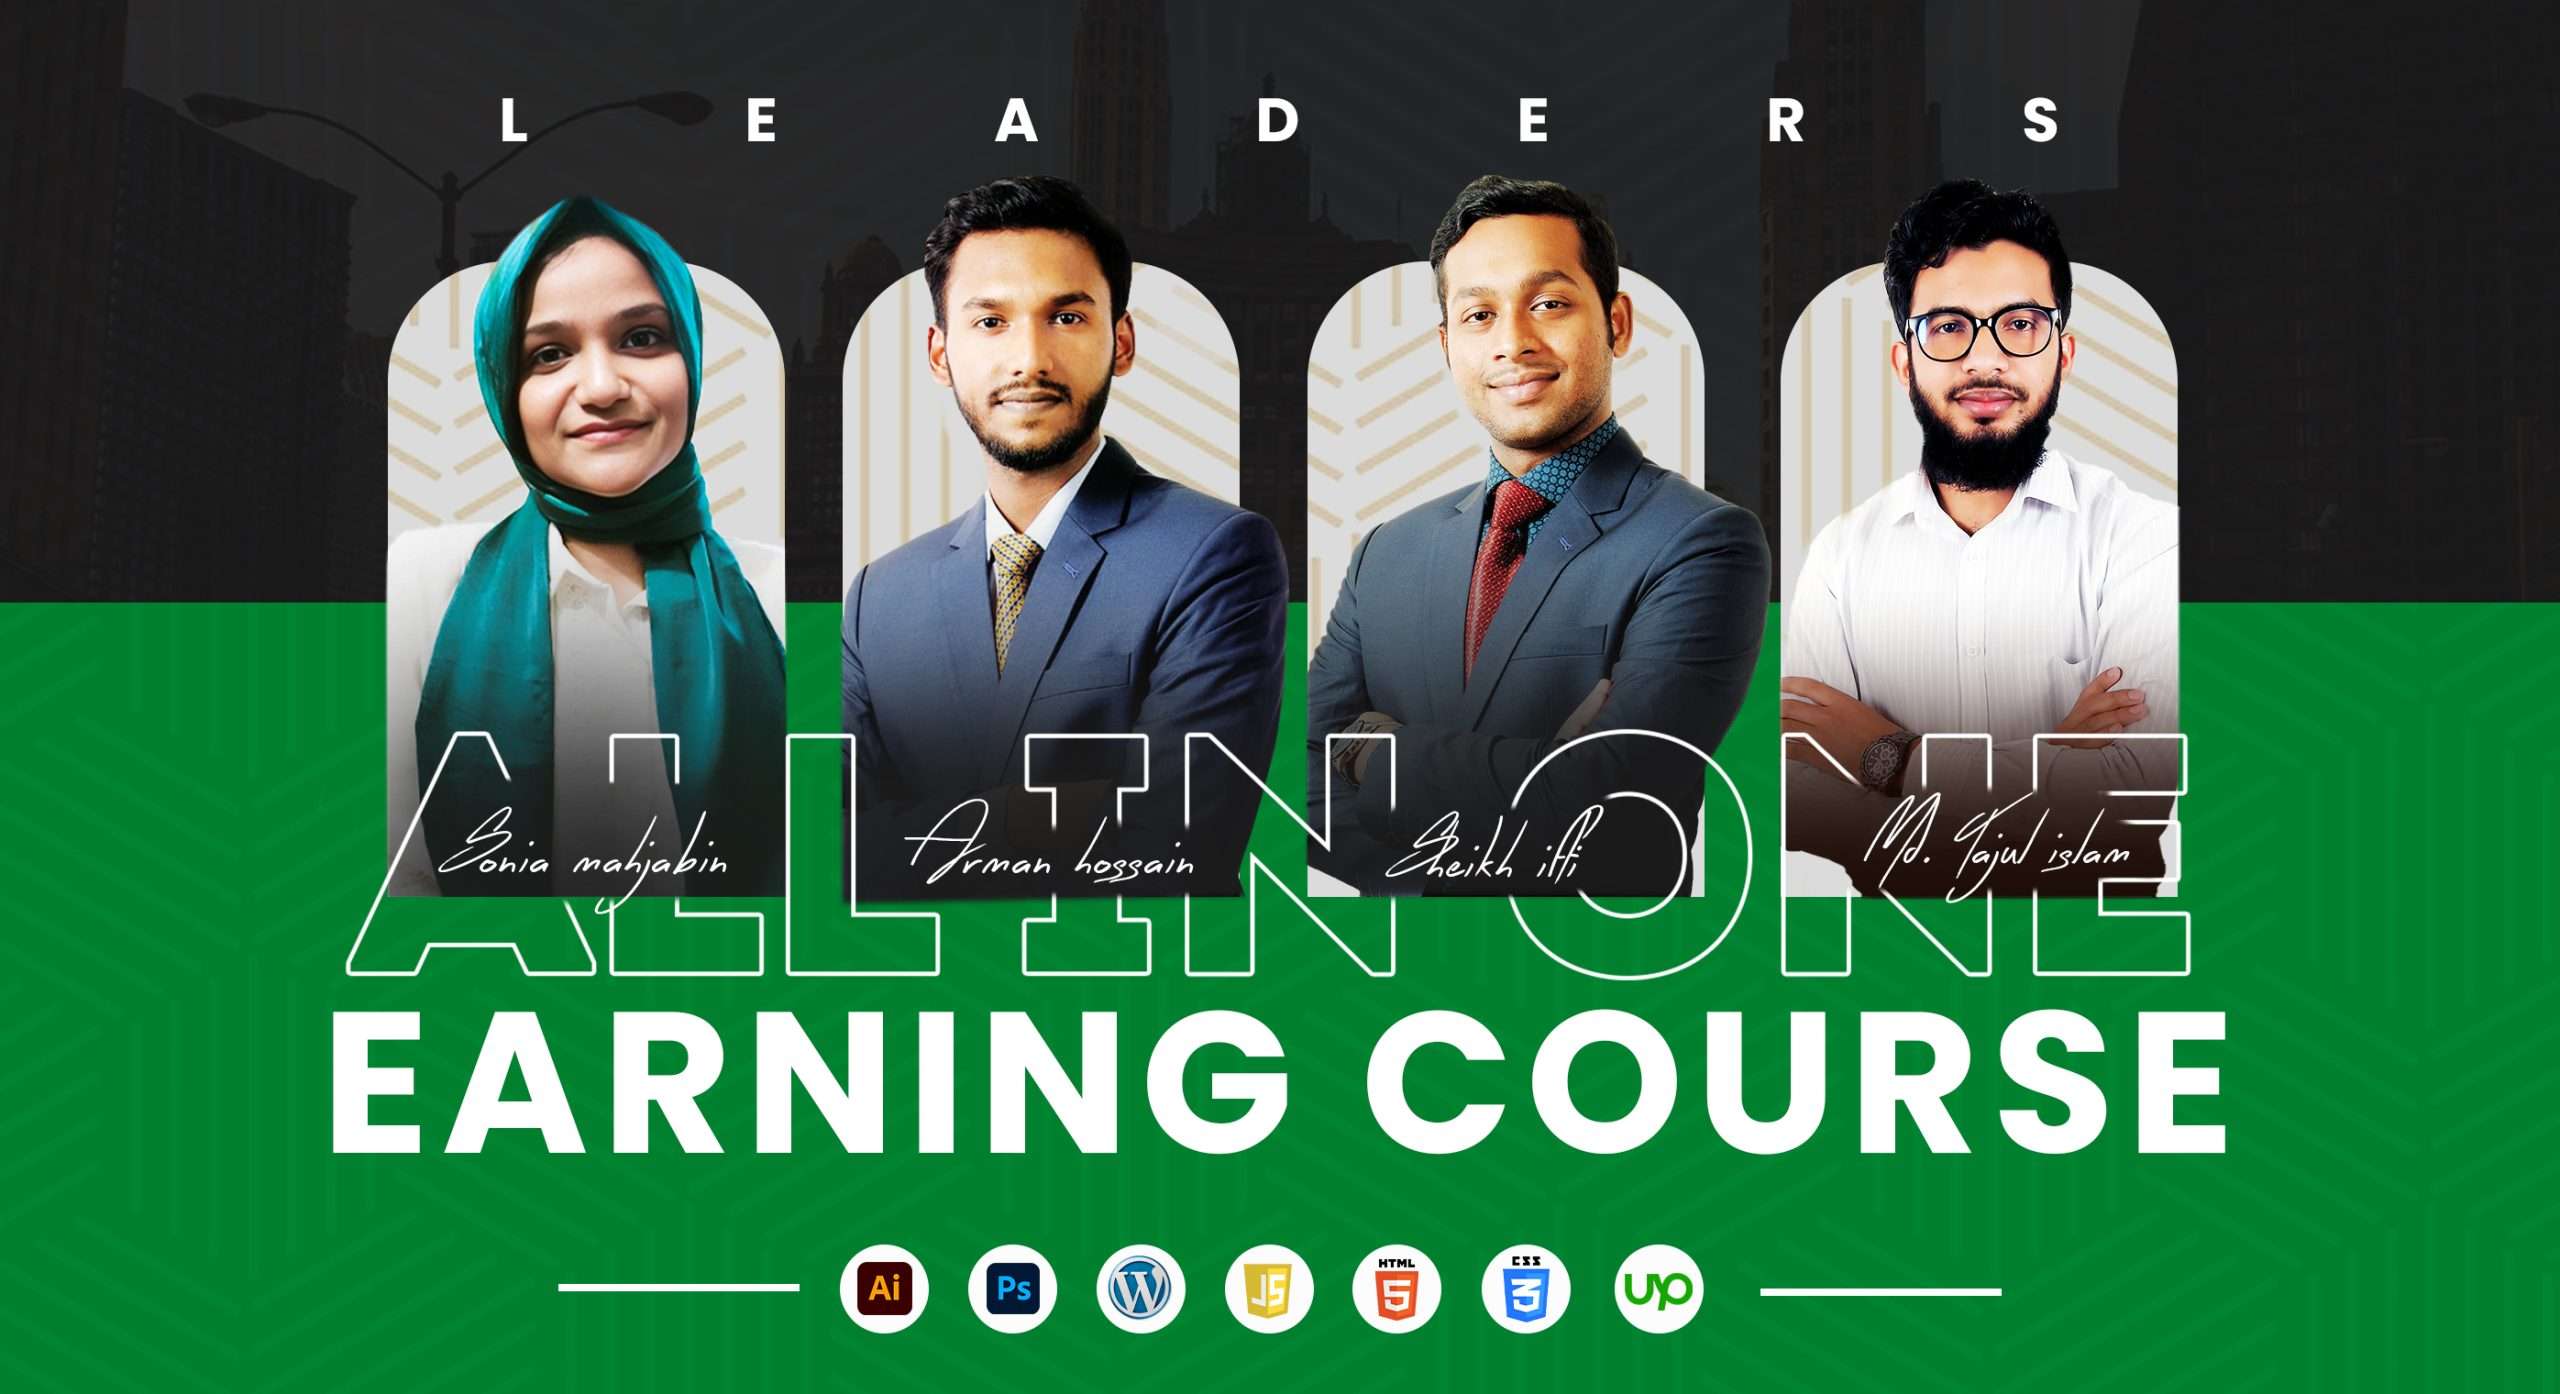 All in one Earning Course